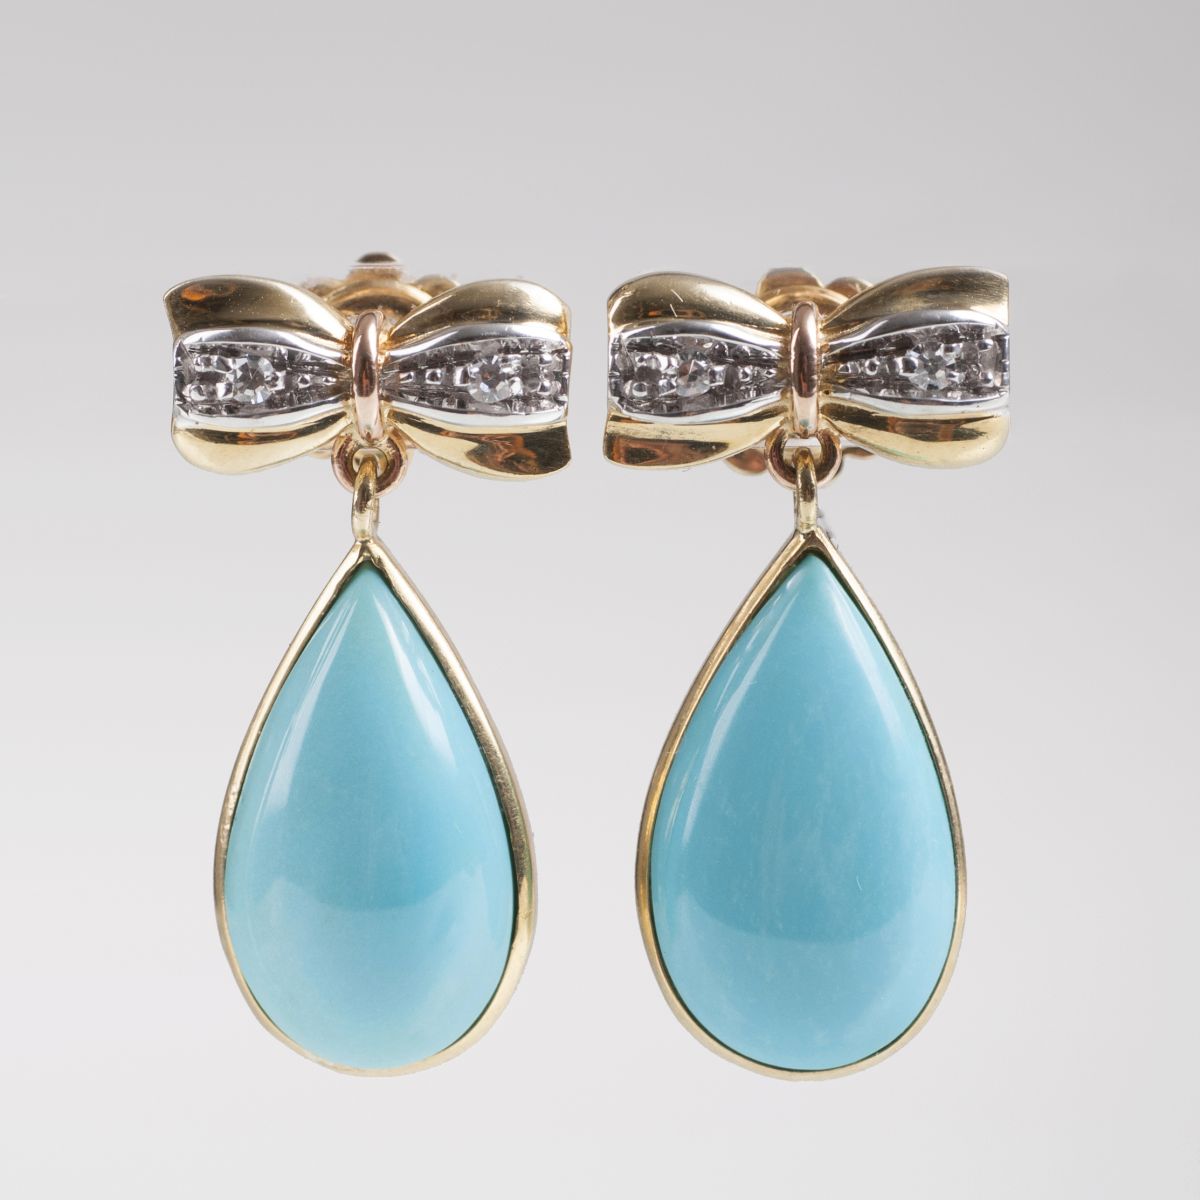 A pair of earrings with turquoise and ribbon decor